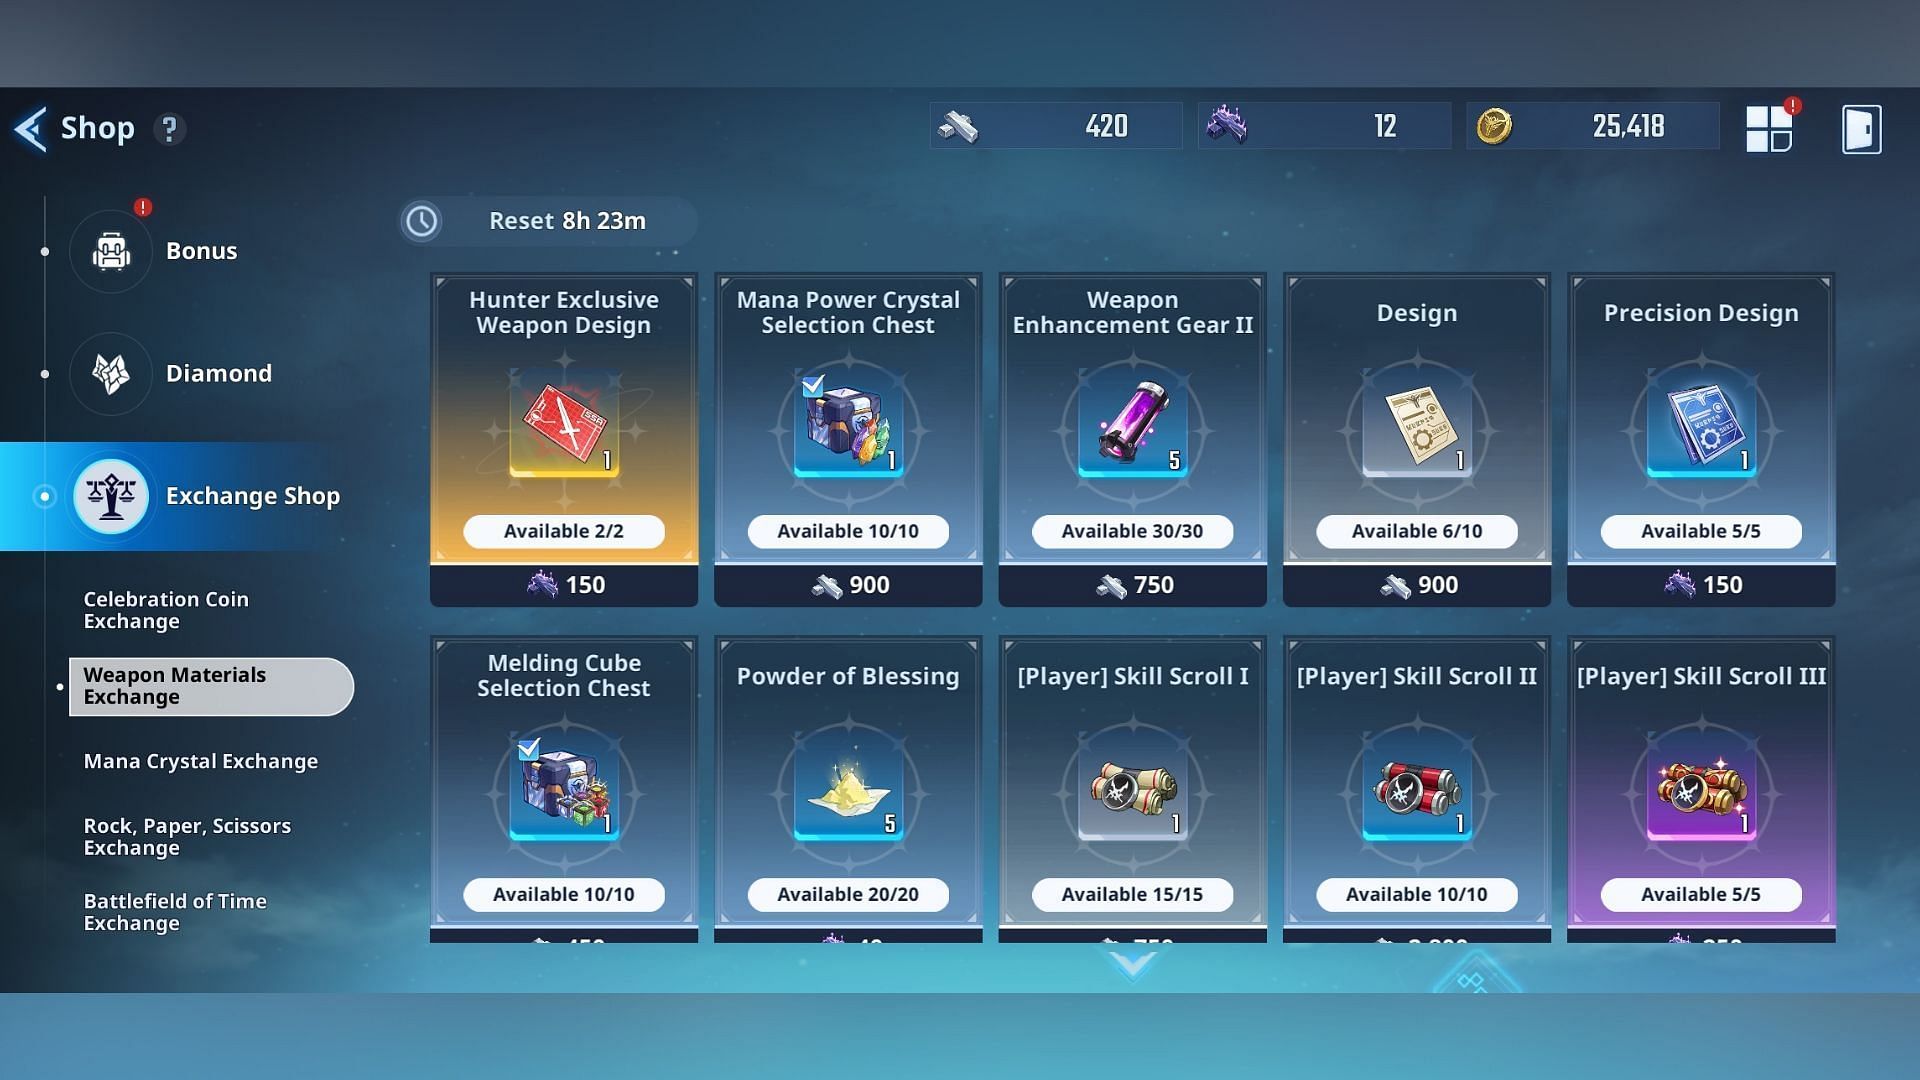 You can get Weapon Enhancement Gears at the Mana Crystal and Weapons Material Exchange shops (Image via Netmarble)